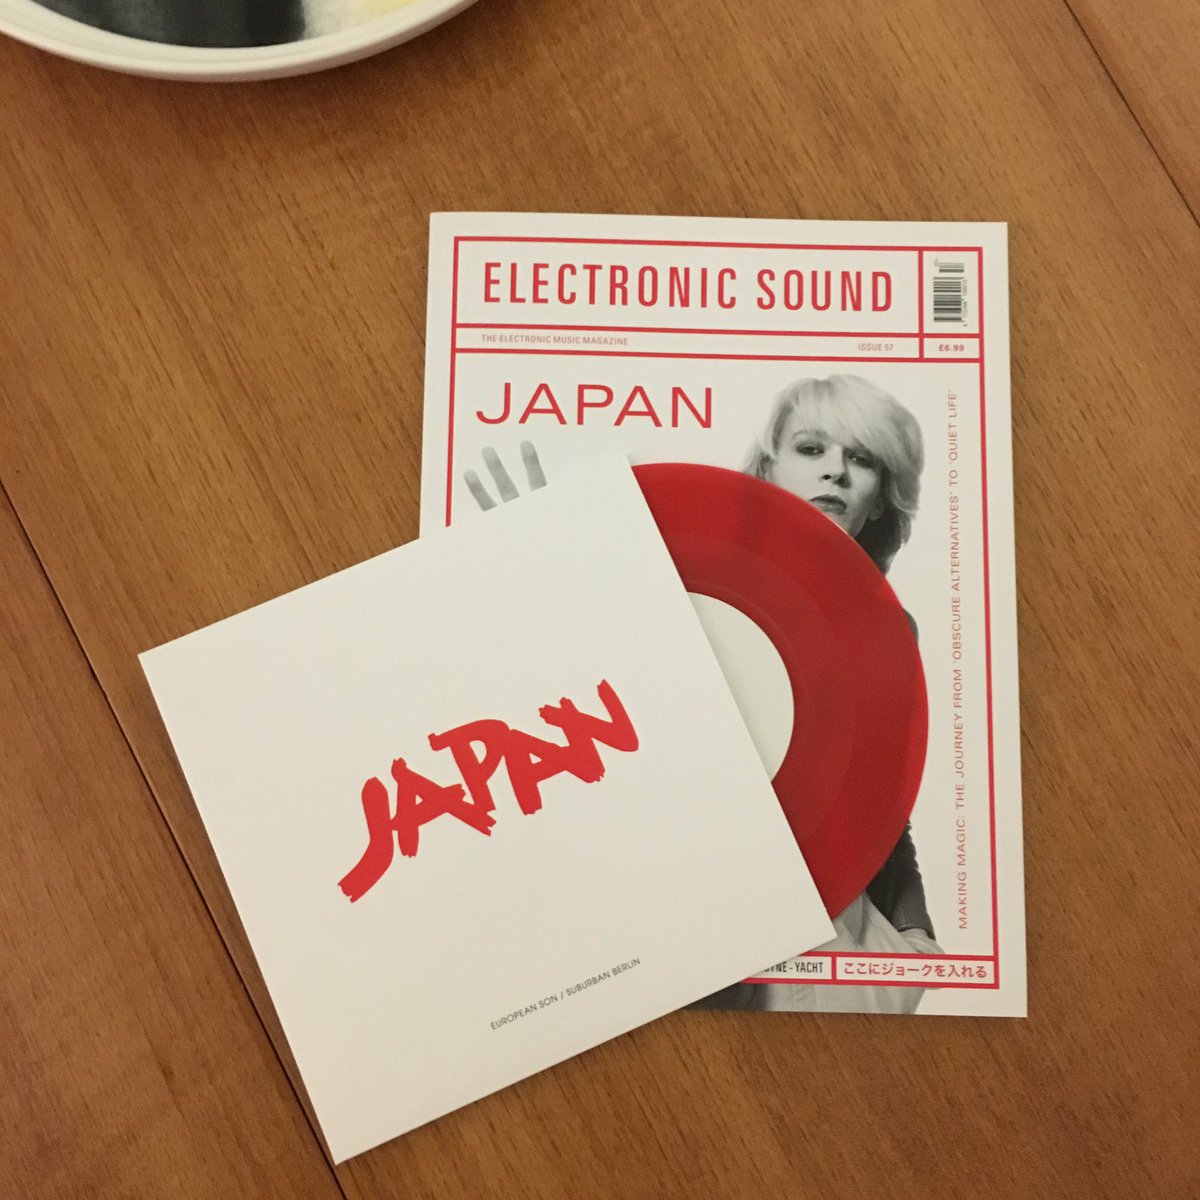 A thing of beauty. You got yours yet @weare1of100 @simonisaac #electronicsound